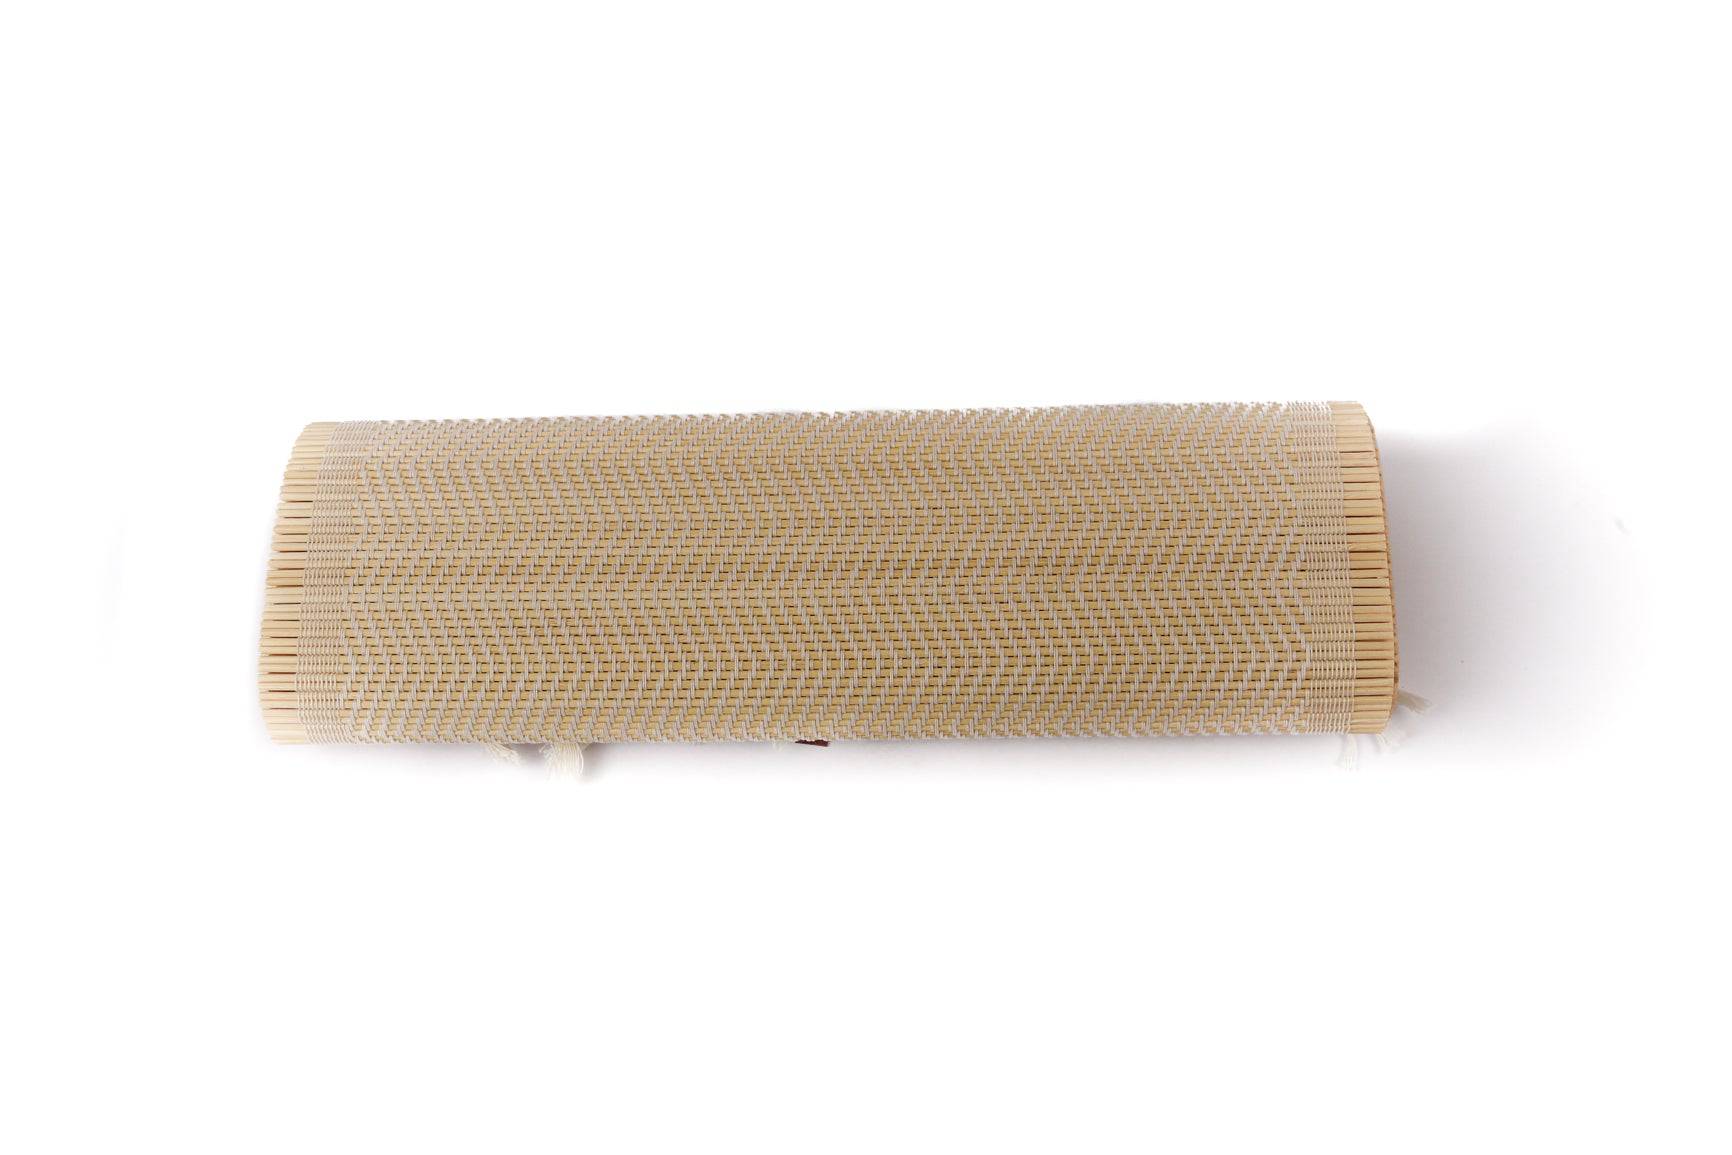 Bamboo Placemats White (13x19)